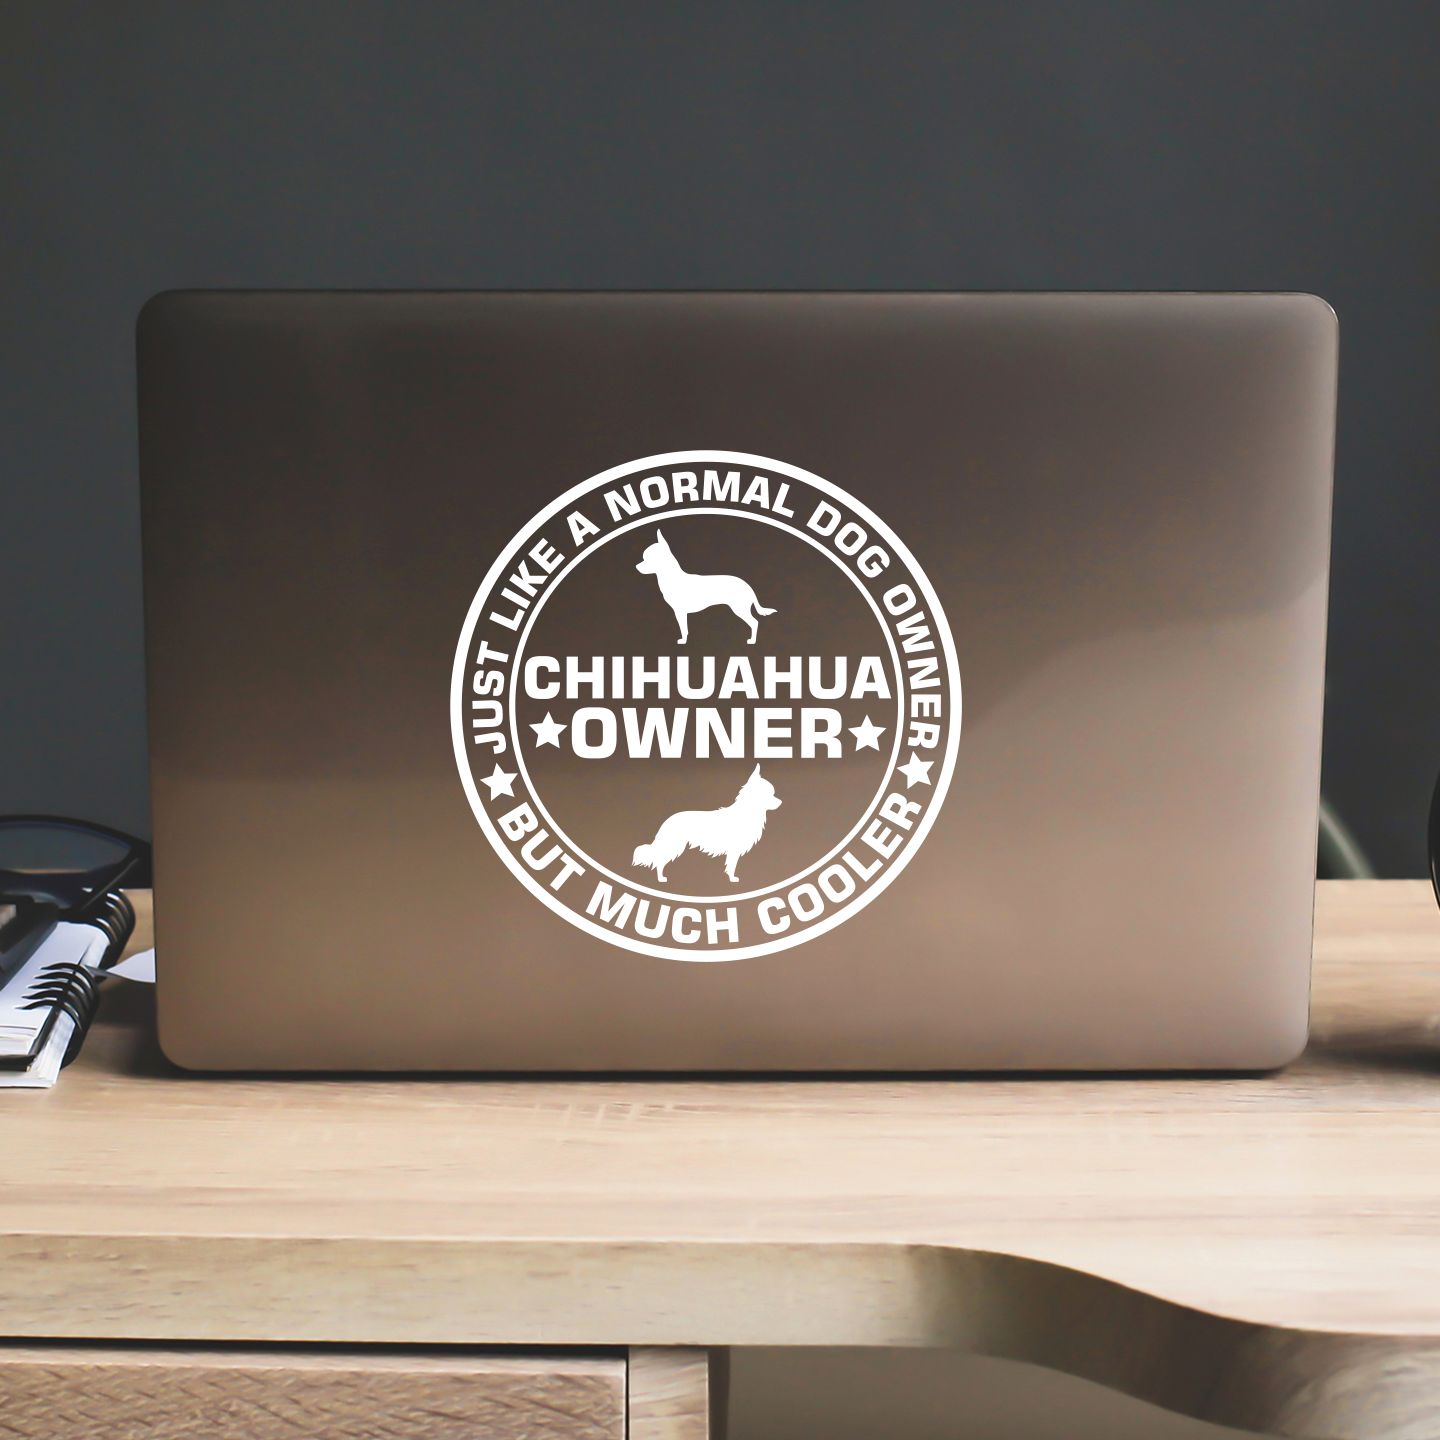 Chihuahua Owner Sticker